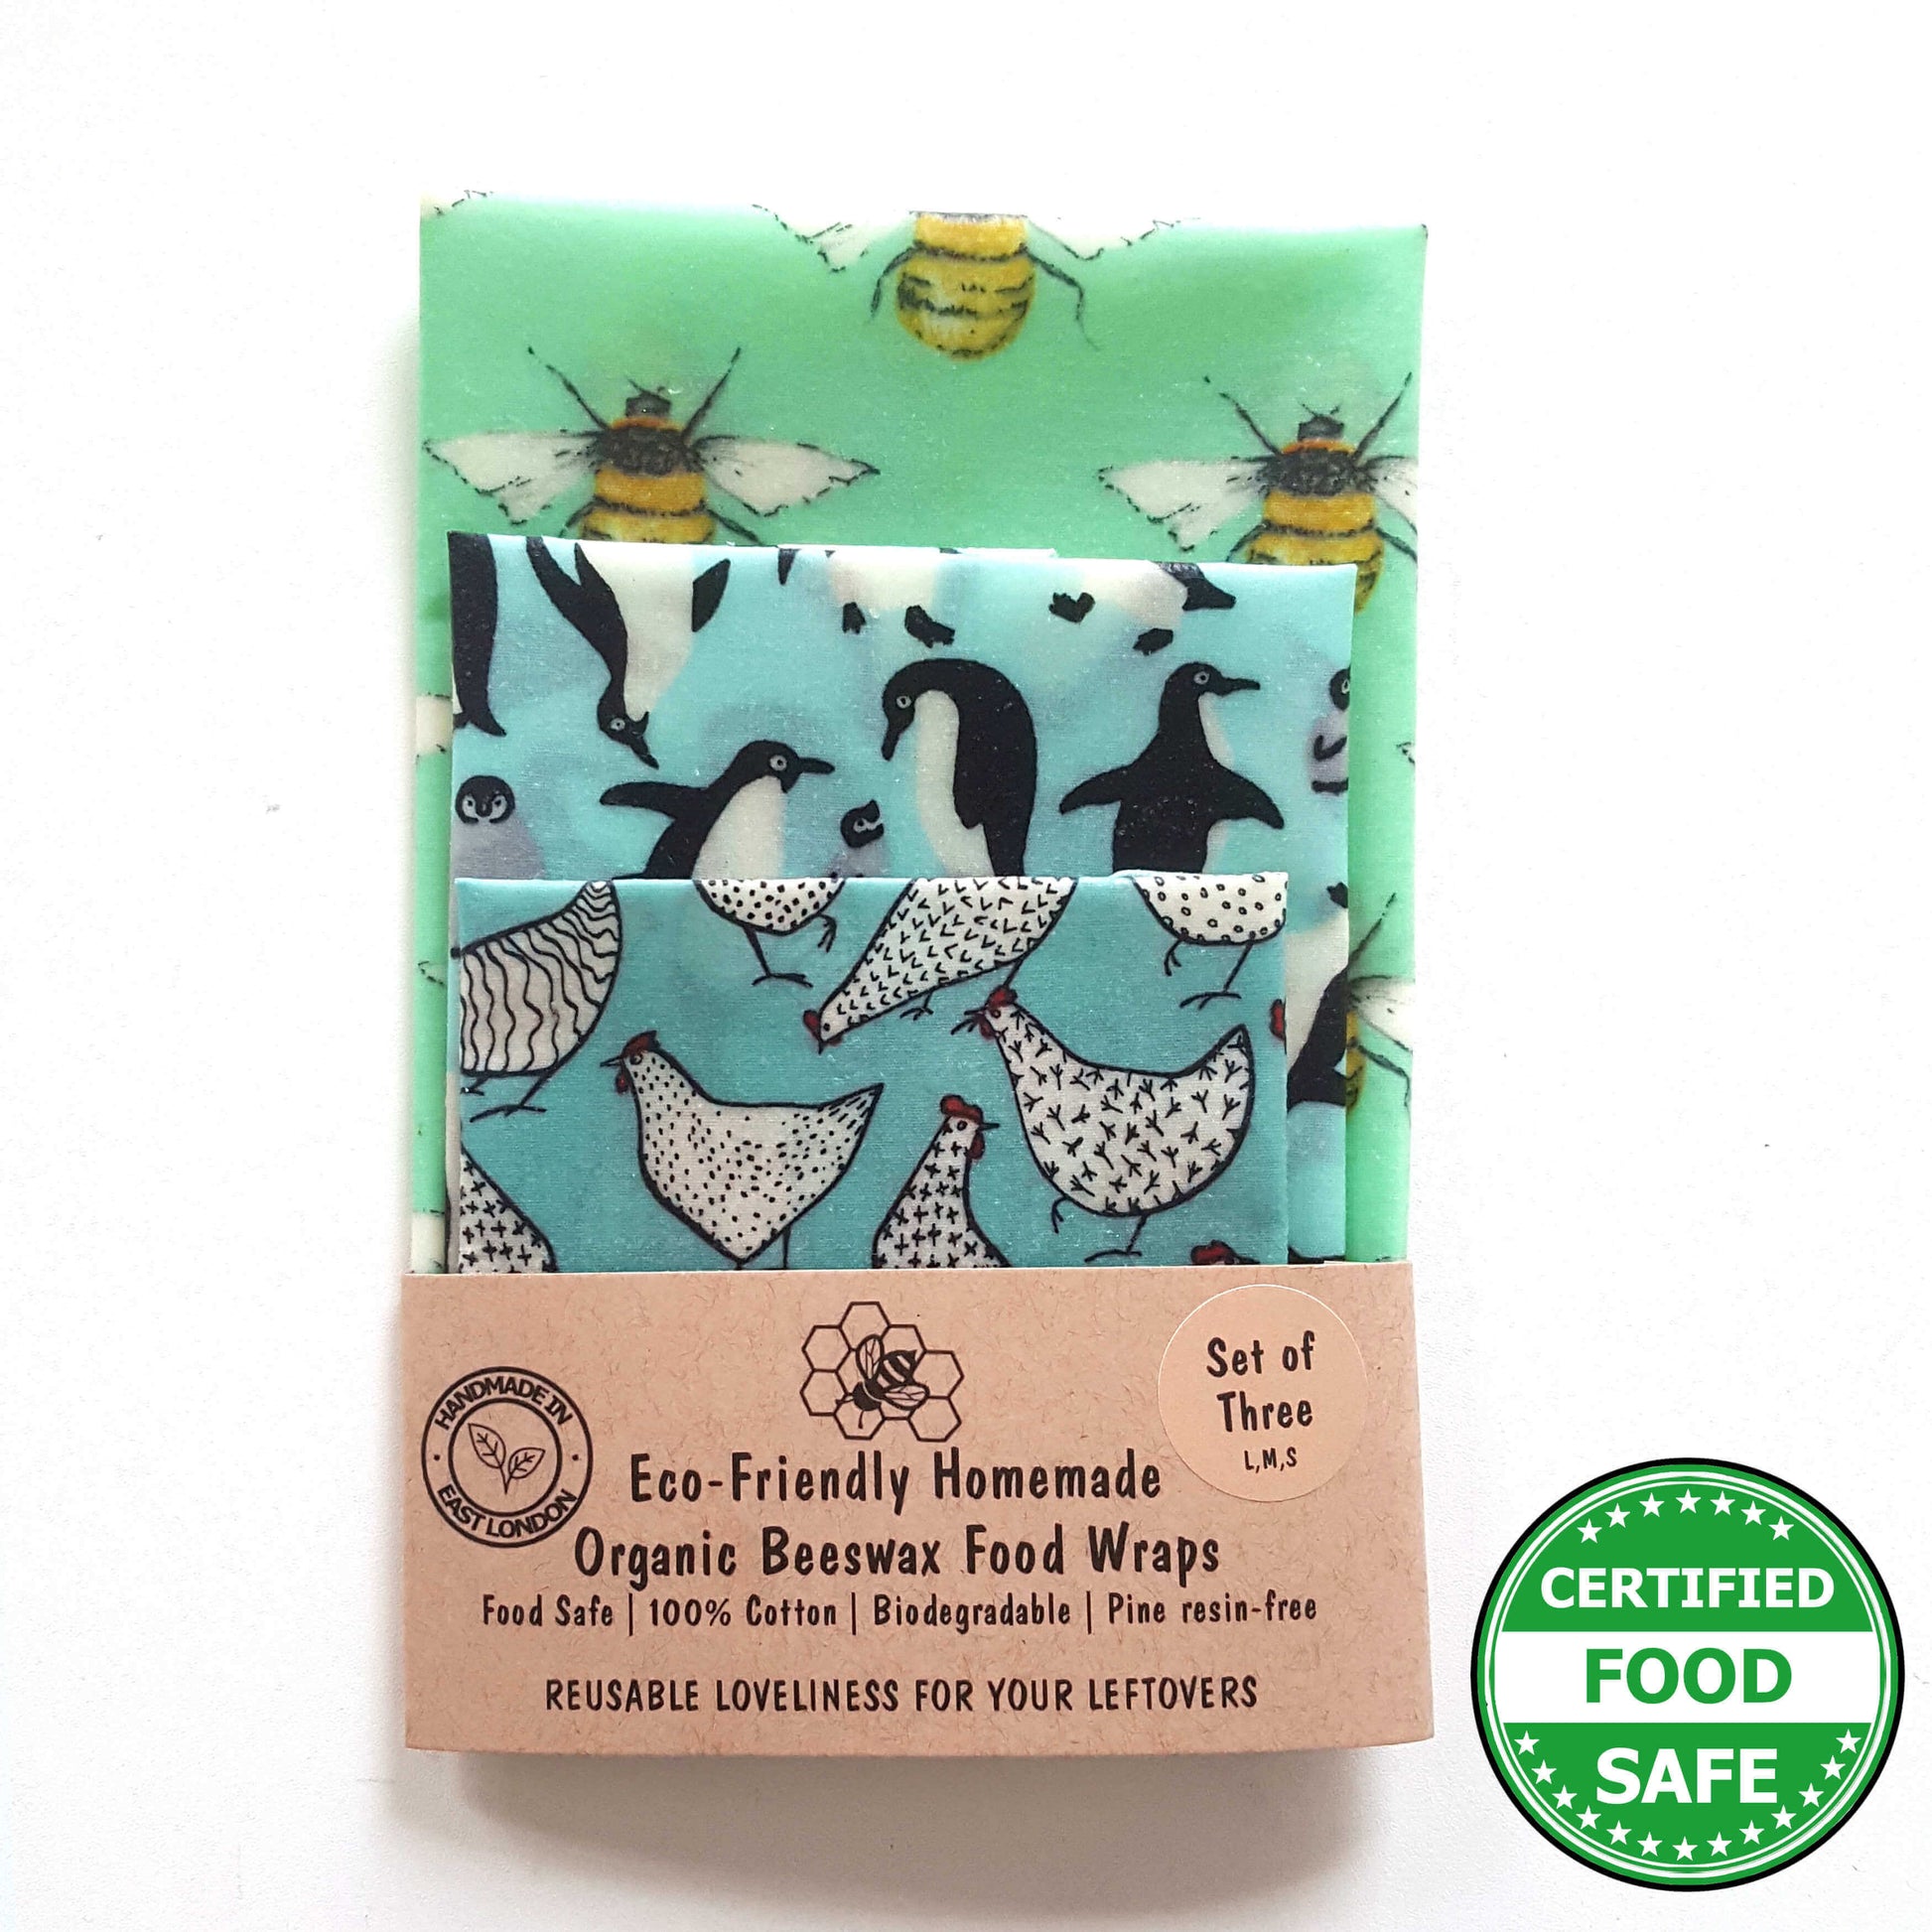 Reusable Beeswax Food Wraps 100% Hand Made in the UK by Honey Bee Good. Earth Kind Classic set of 3 in Penguins, Hens & Bees